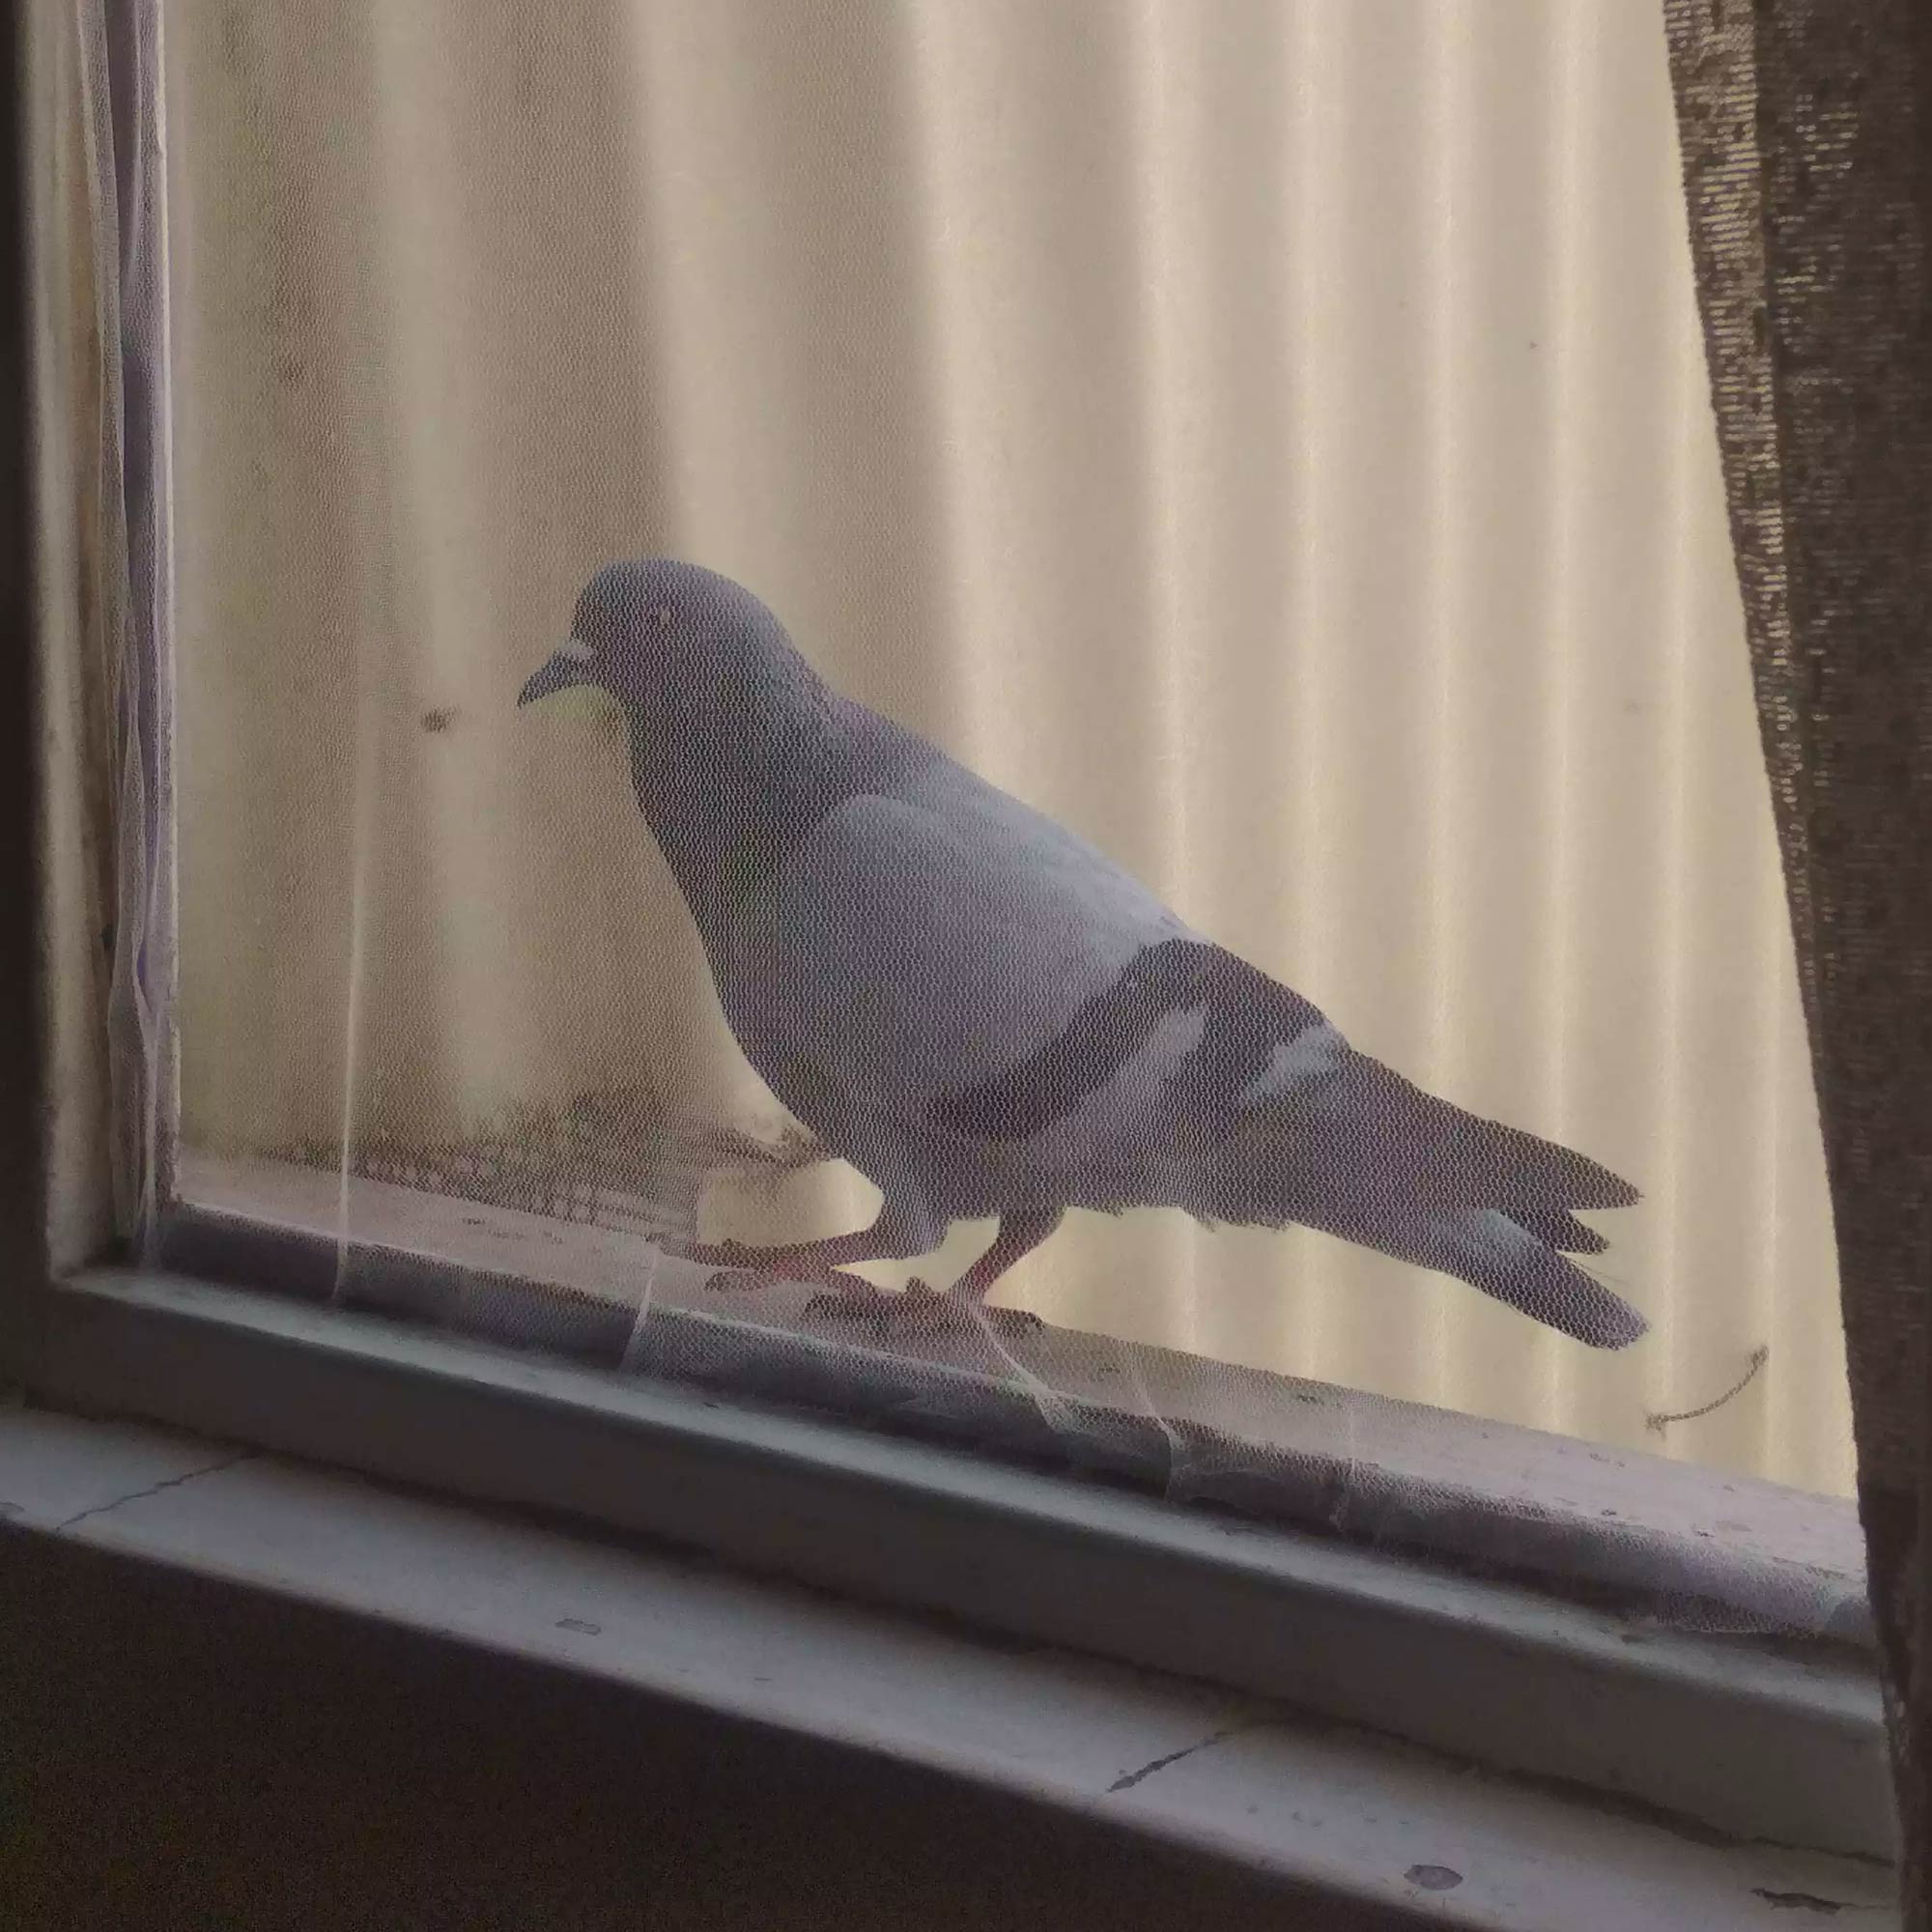 A Rock Dove sitting in front of a window